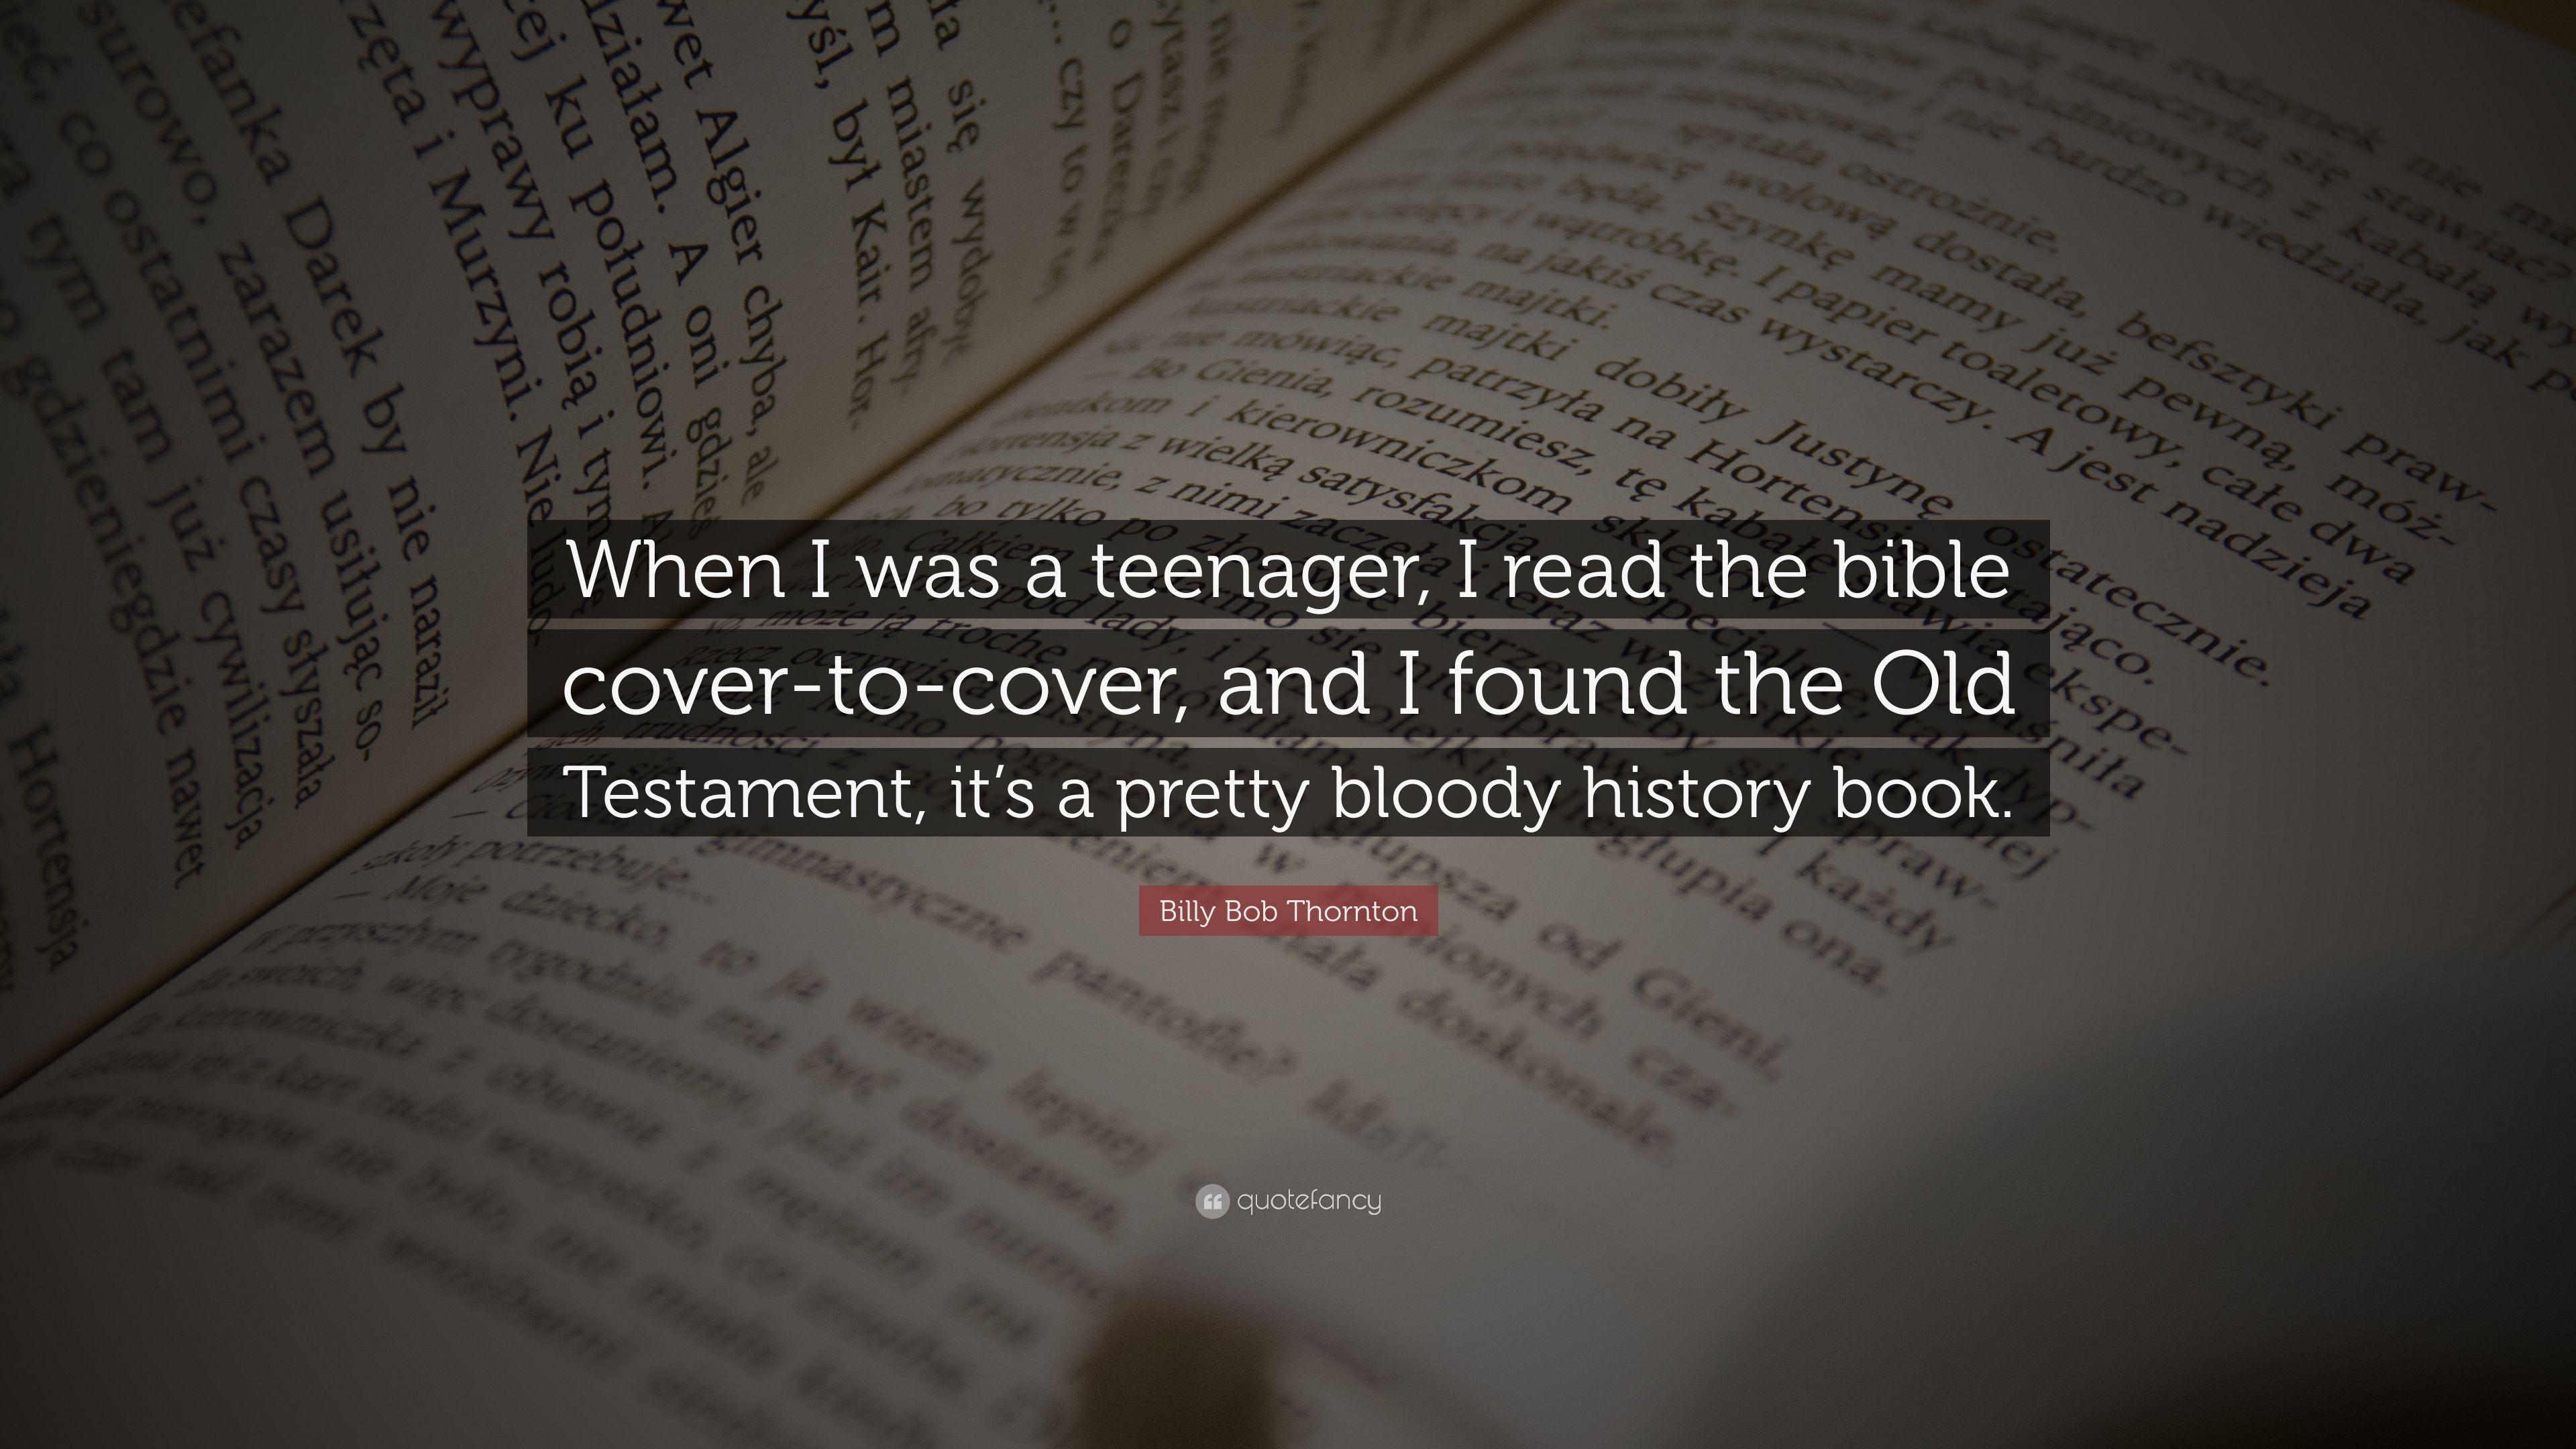 Billy Bob Thornton Quote: “When I was a teenager, I read